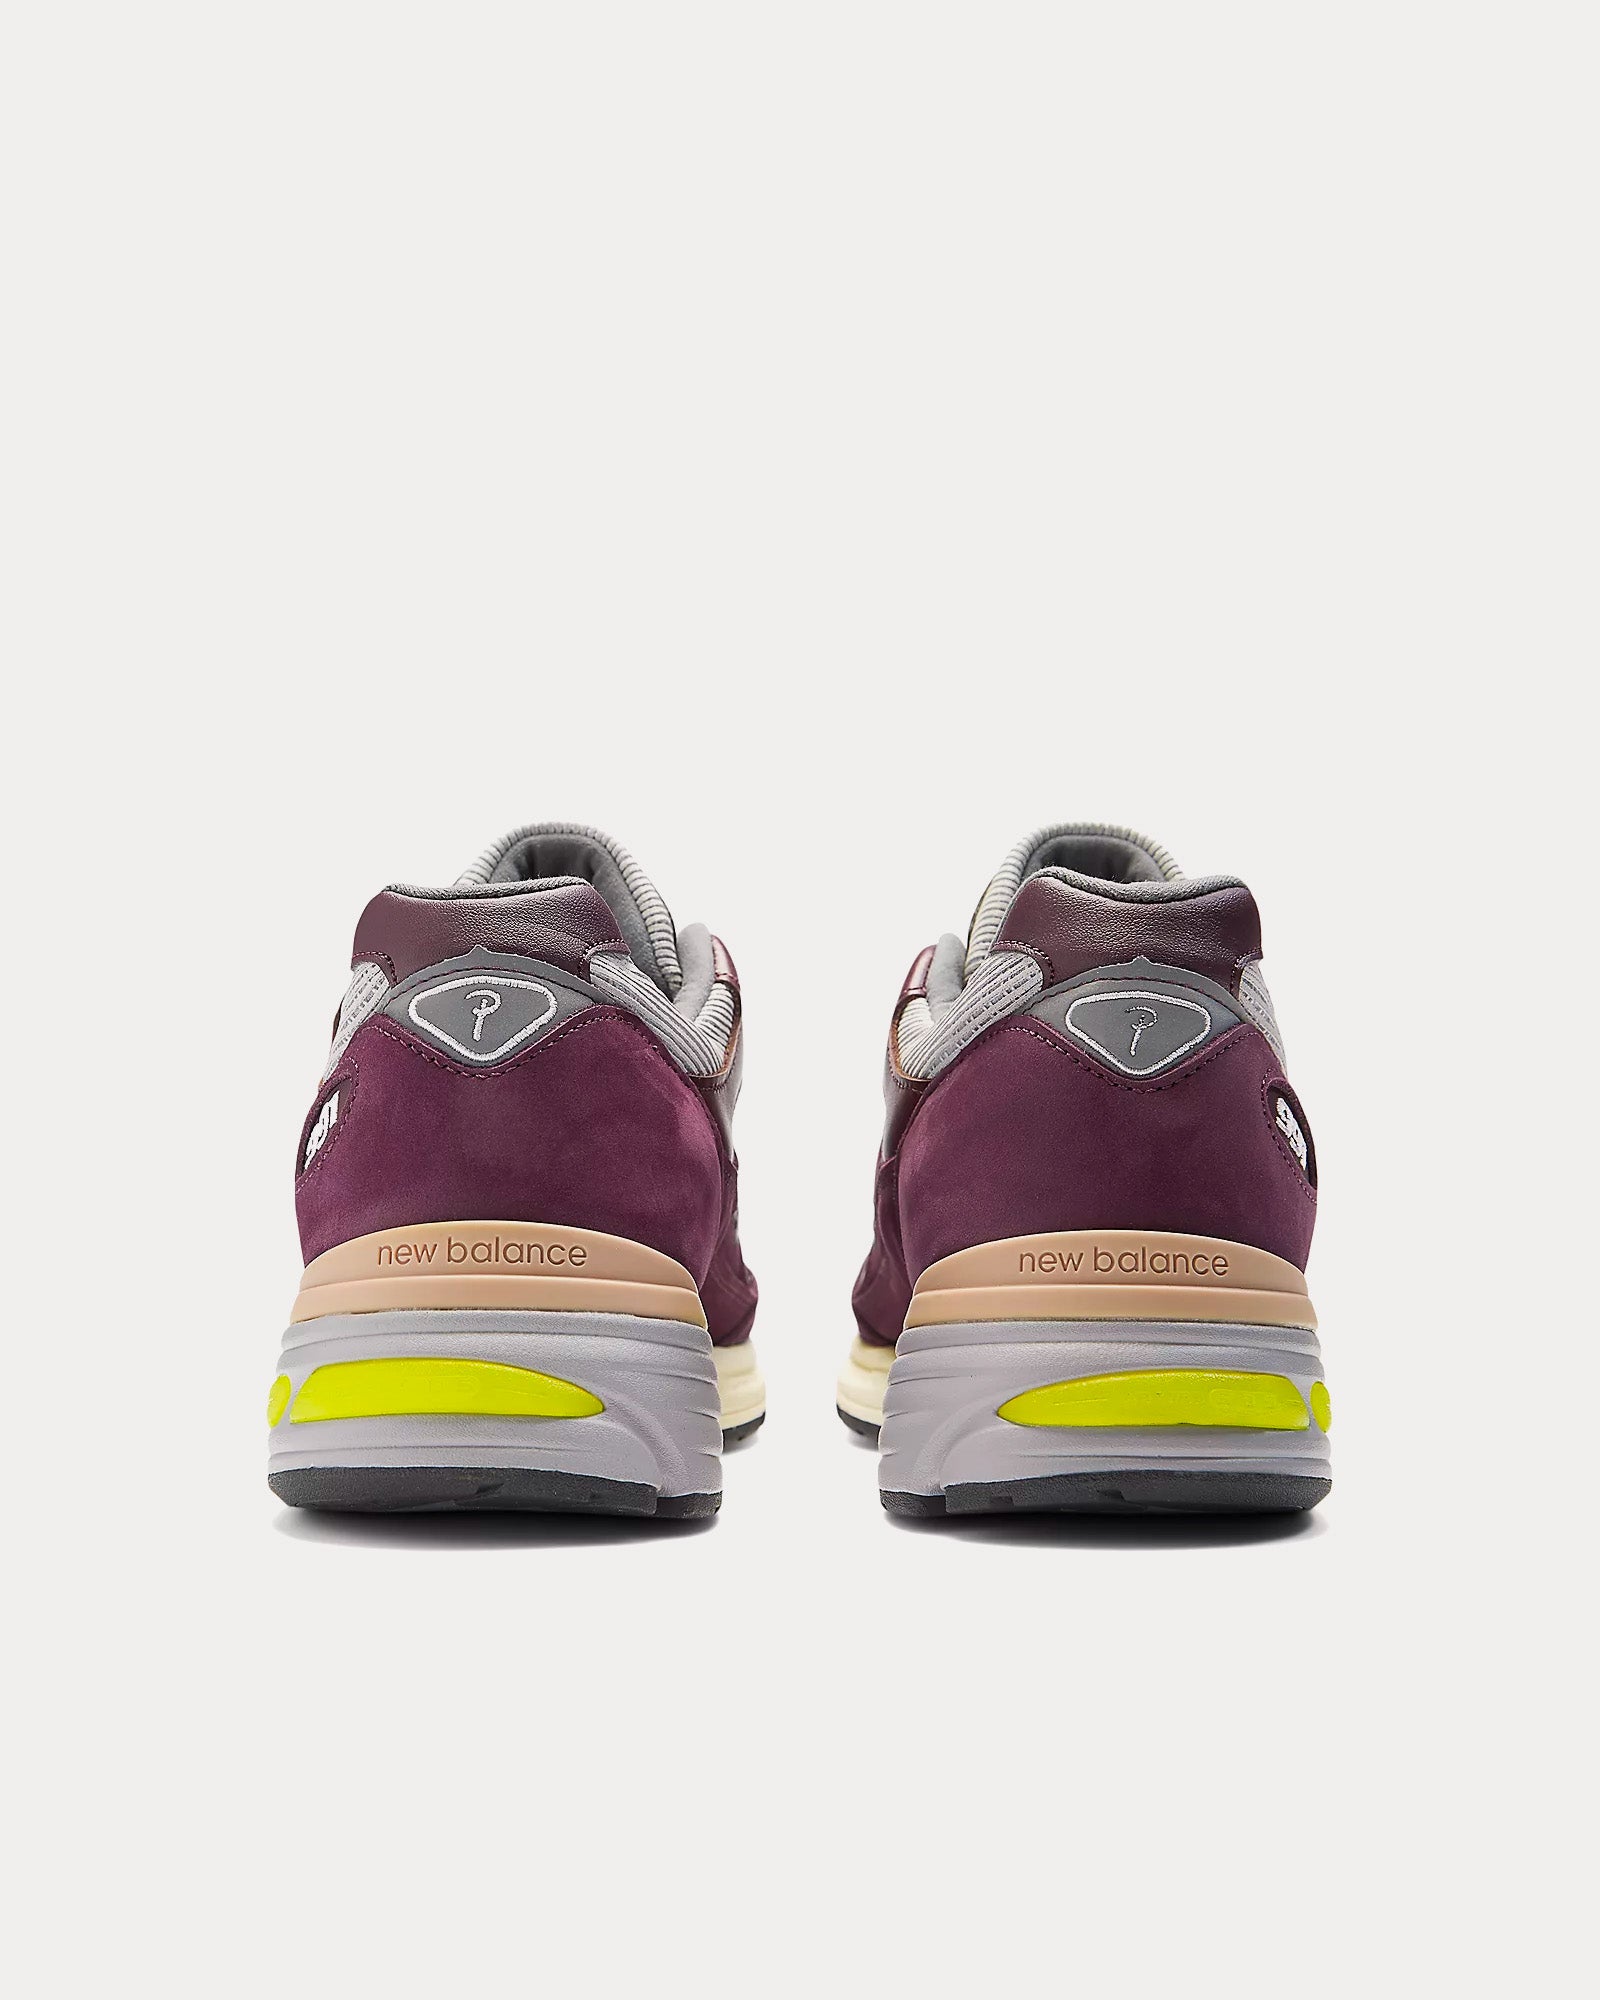 New Balance x Patta - MADE in UK 991v2 Pickled Beet / Safety Yellow / Winetasting Low Top Sneakers